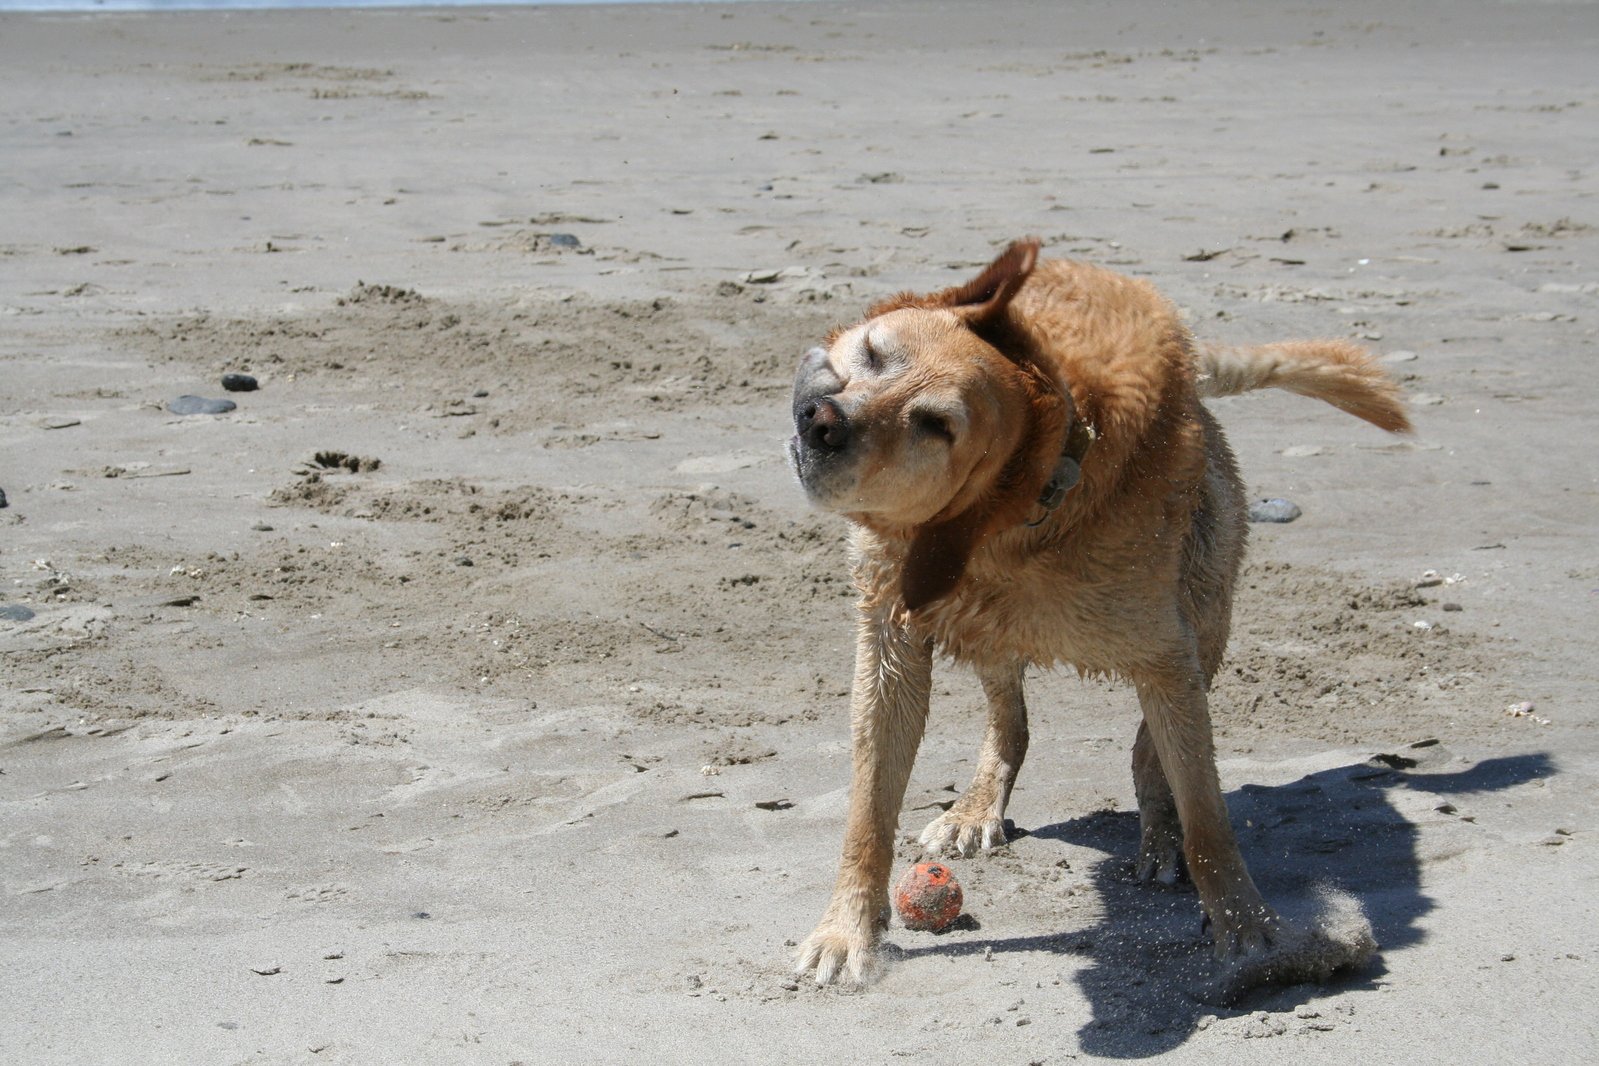 a close up of a dog standing on a beach